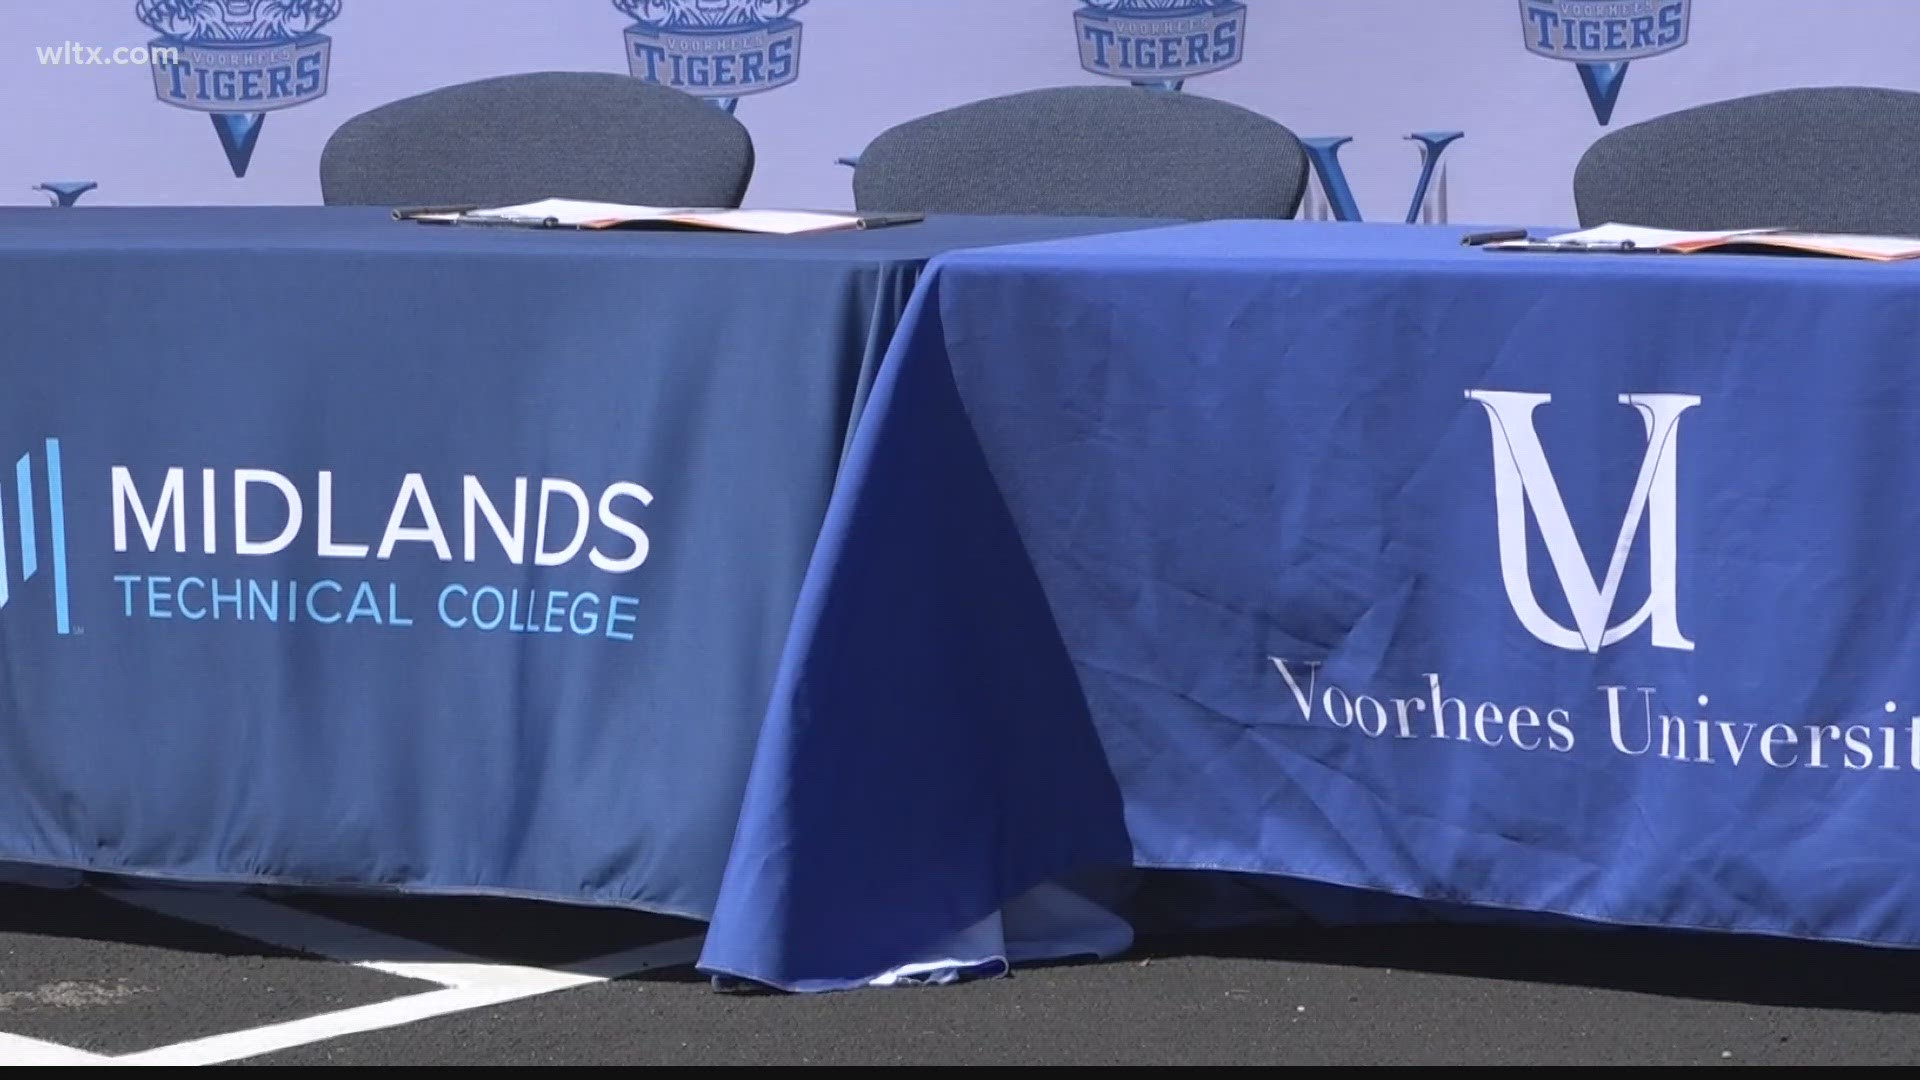 The Voorhees University Education center officially opened at Midlands Technical College in Batesburg-Leesville.